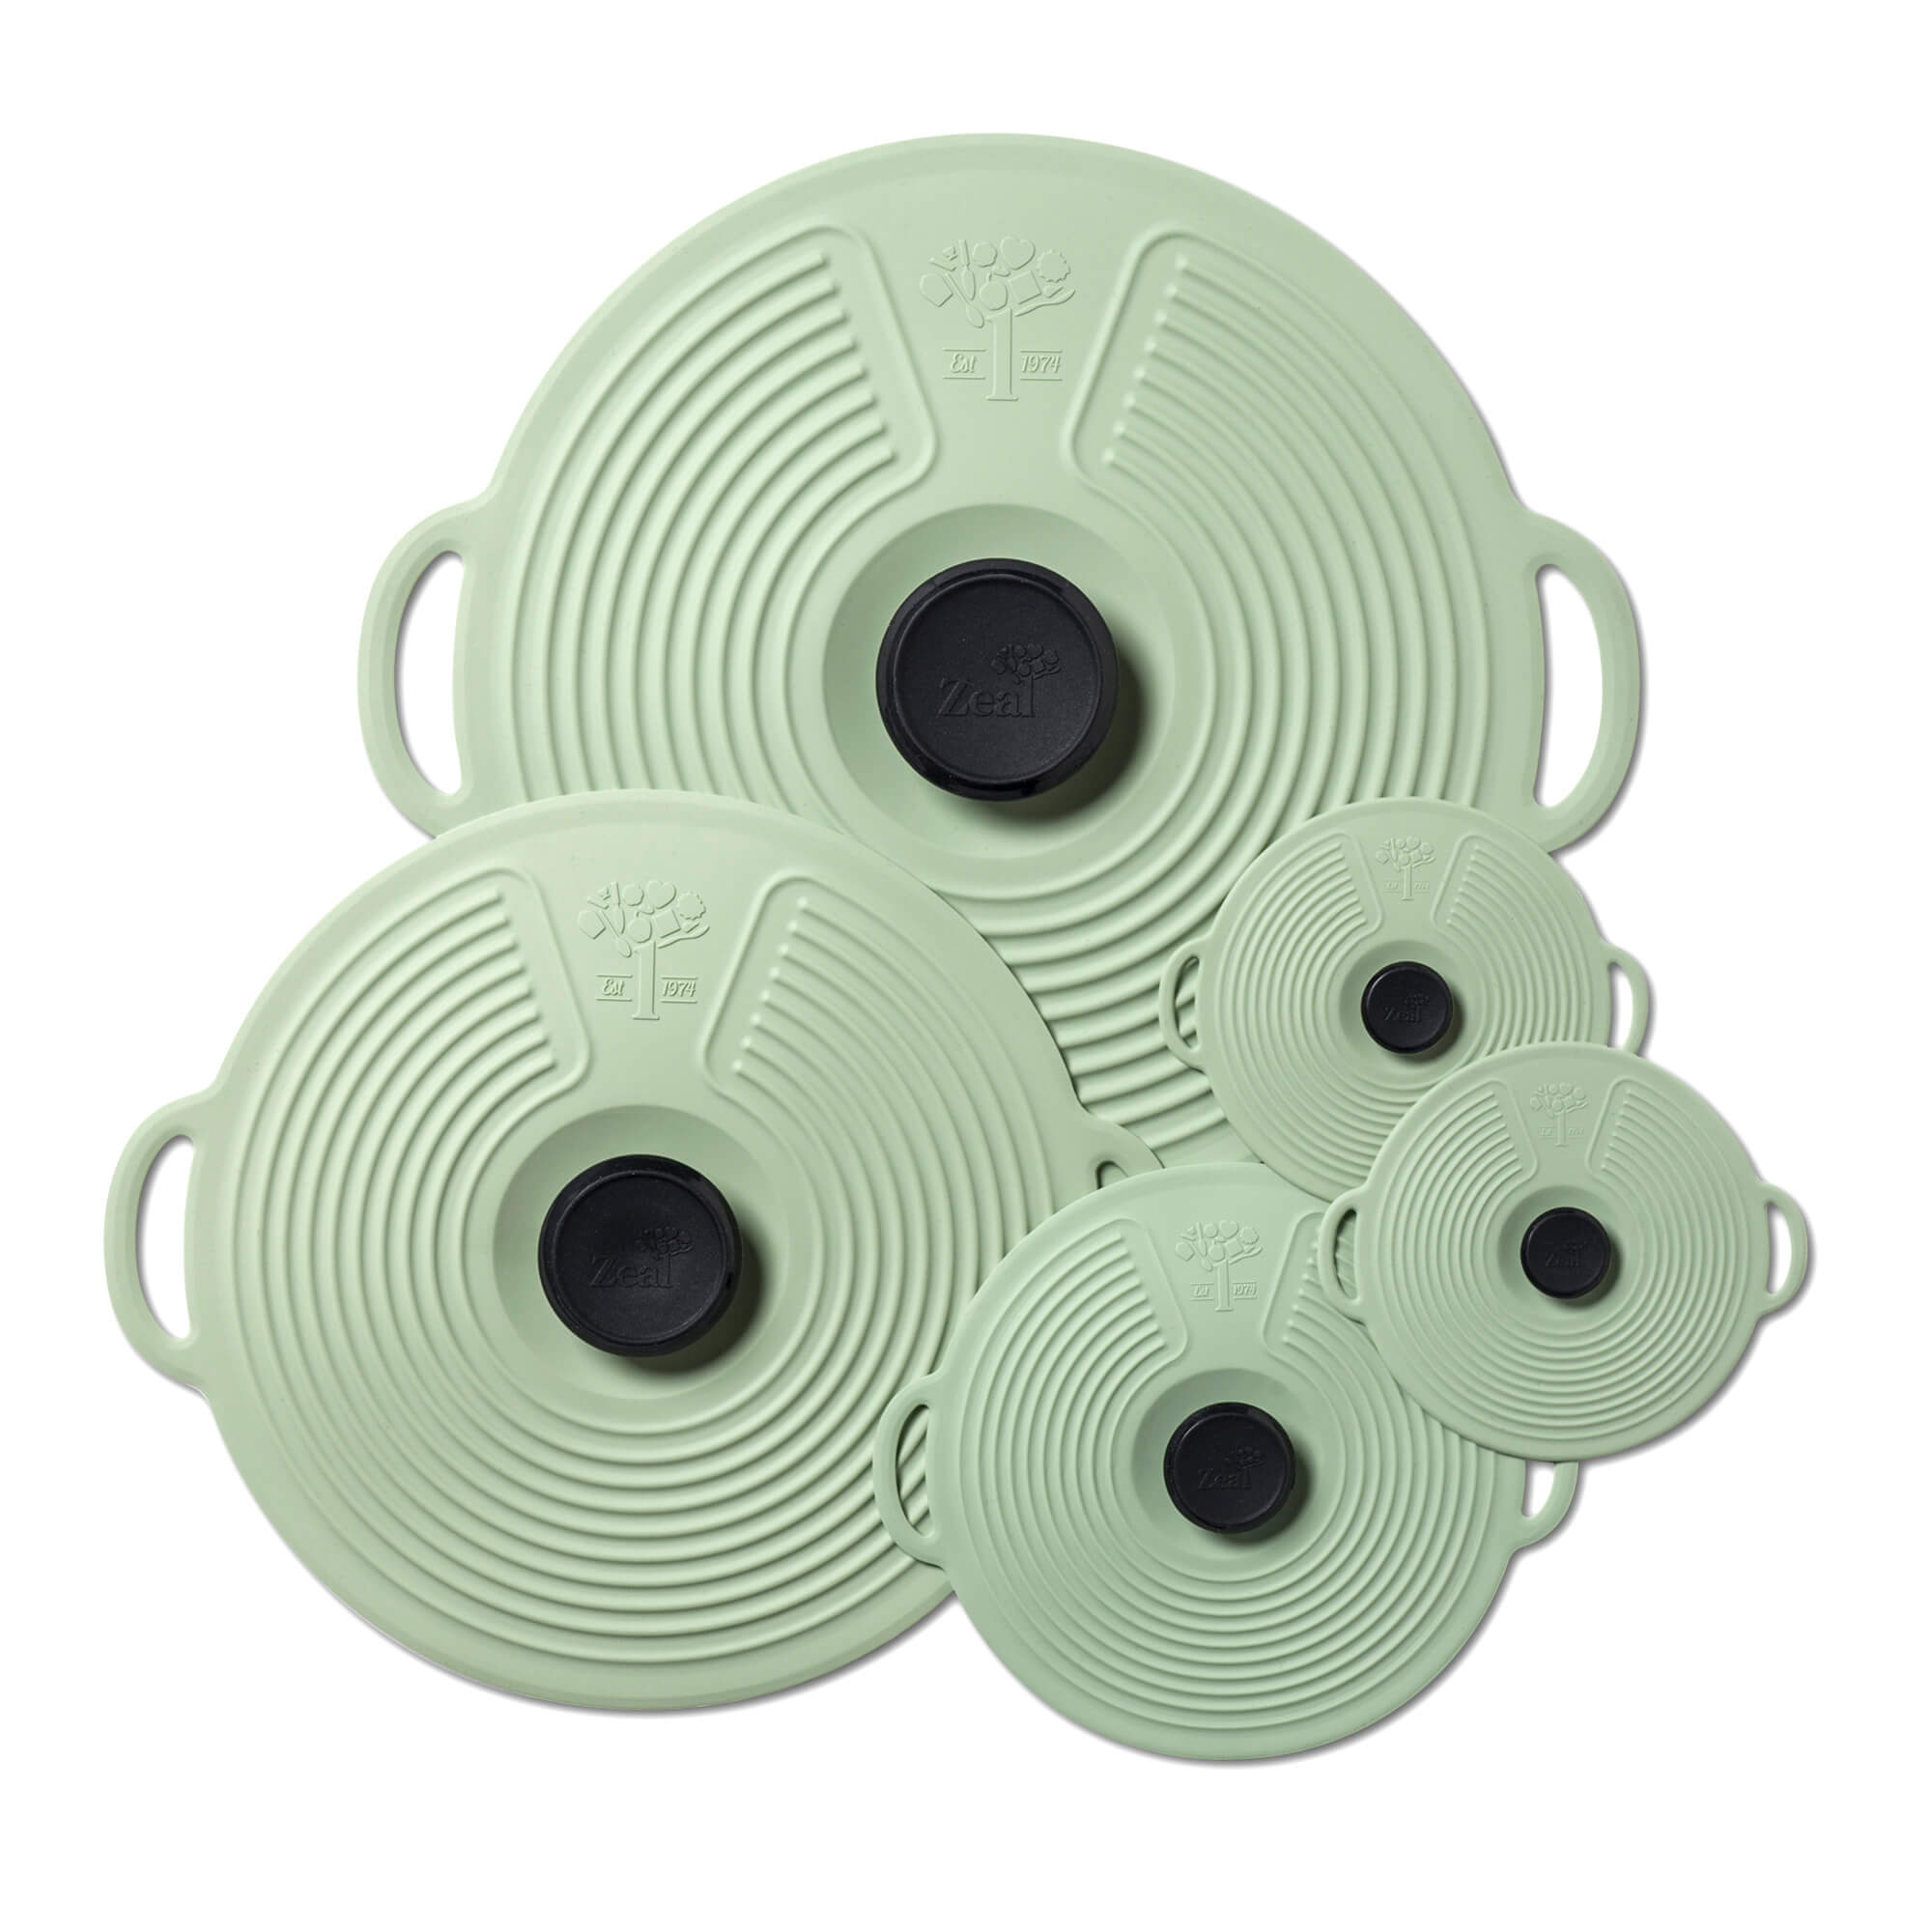 Set of Zeal Silicone Lids in Sage Green